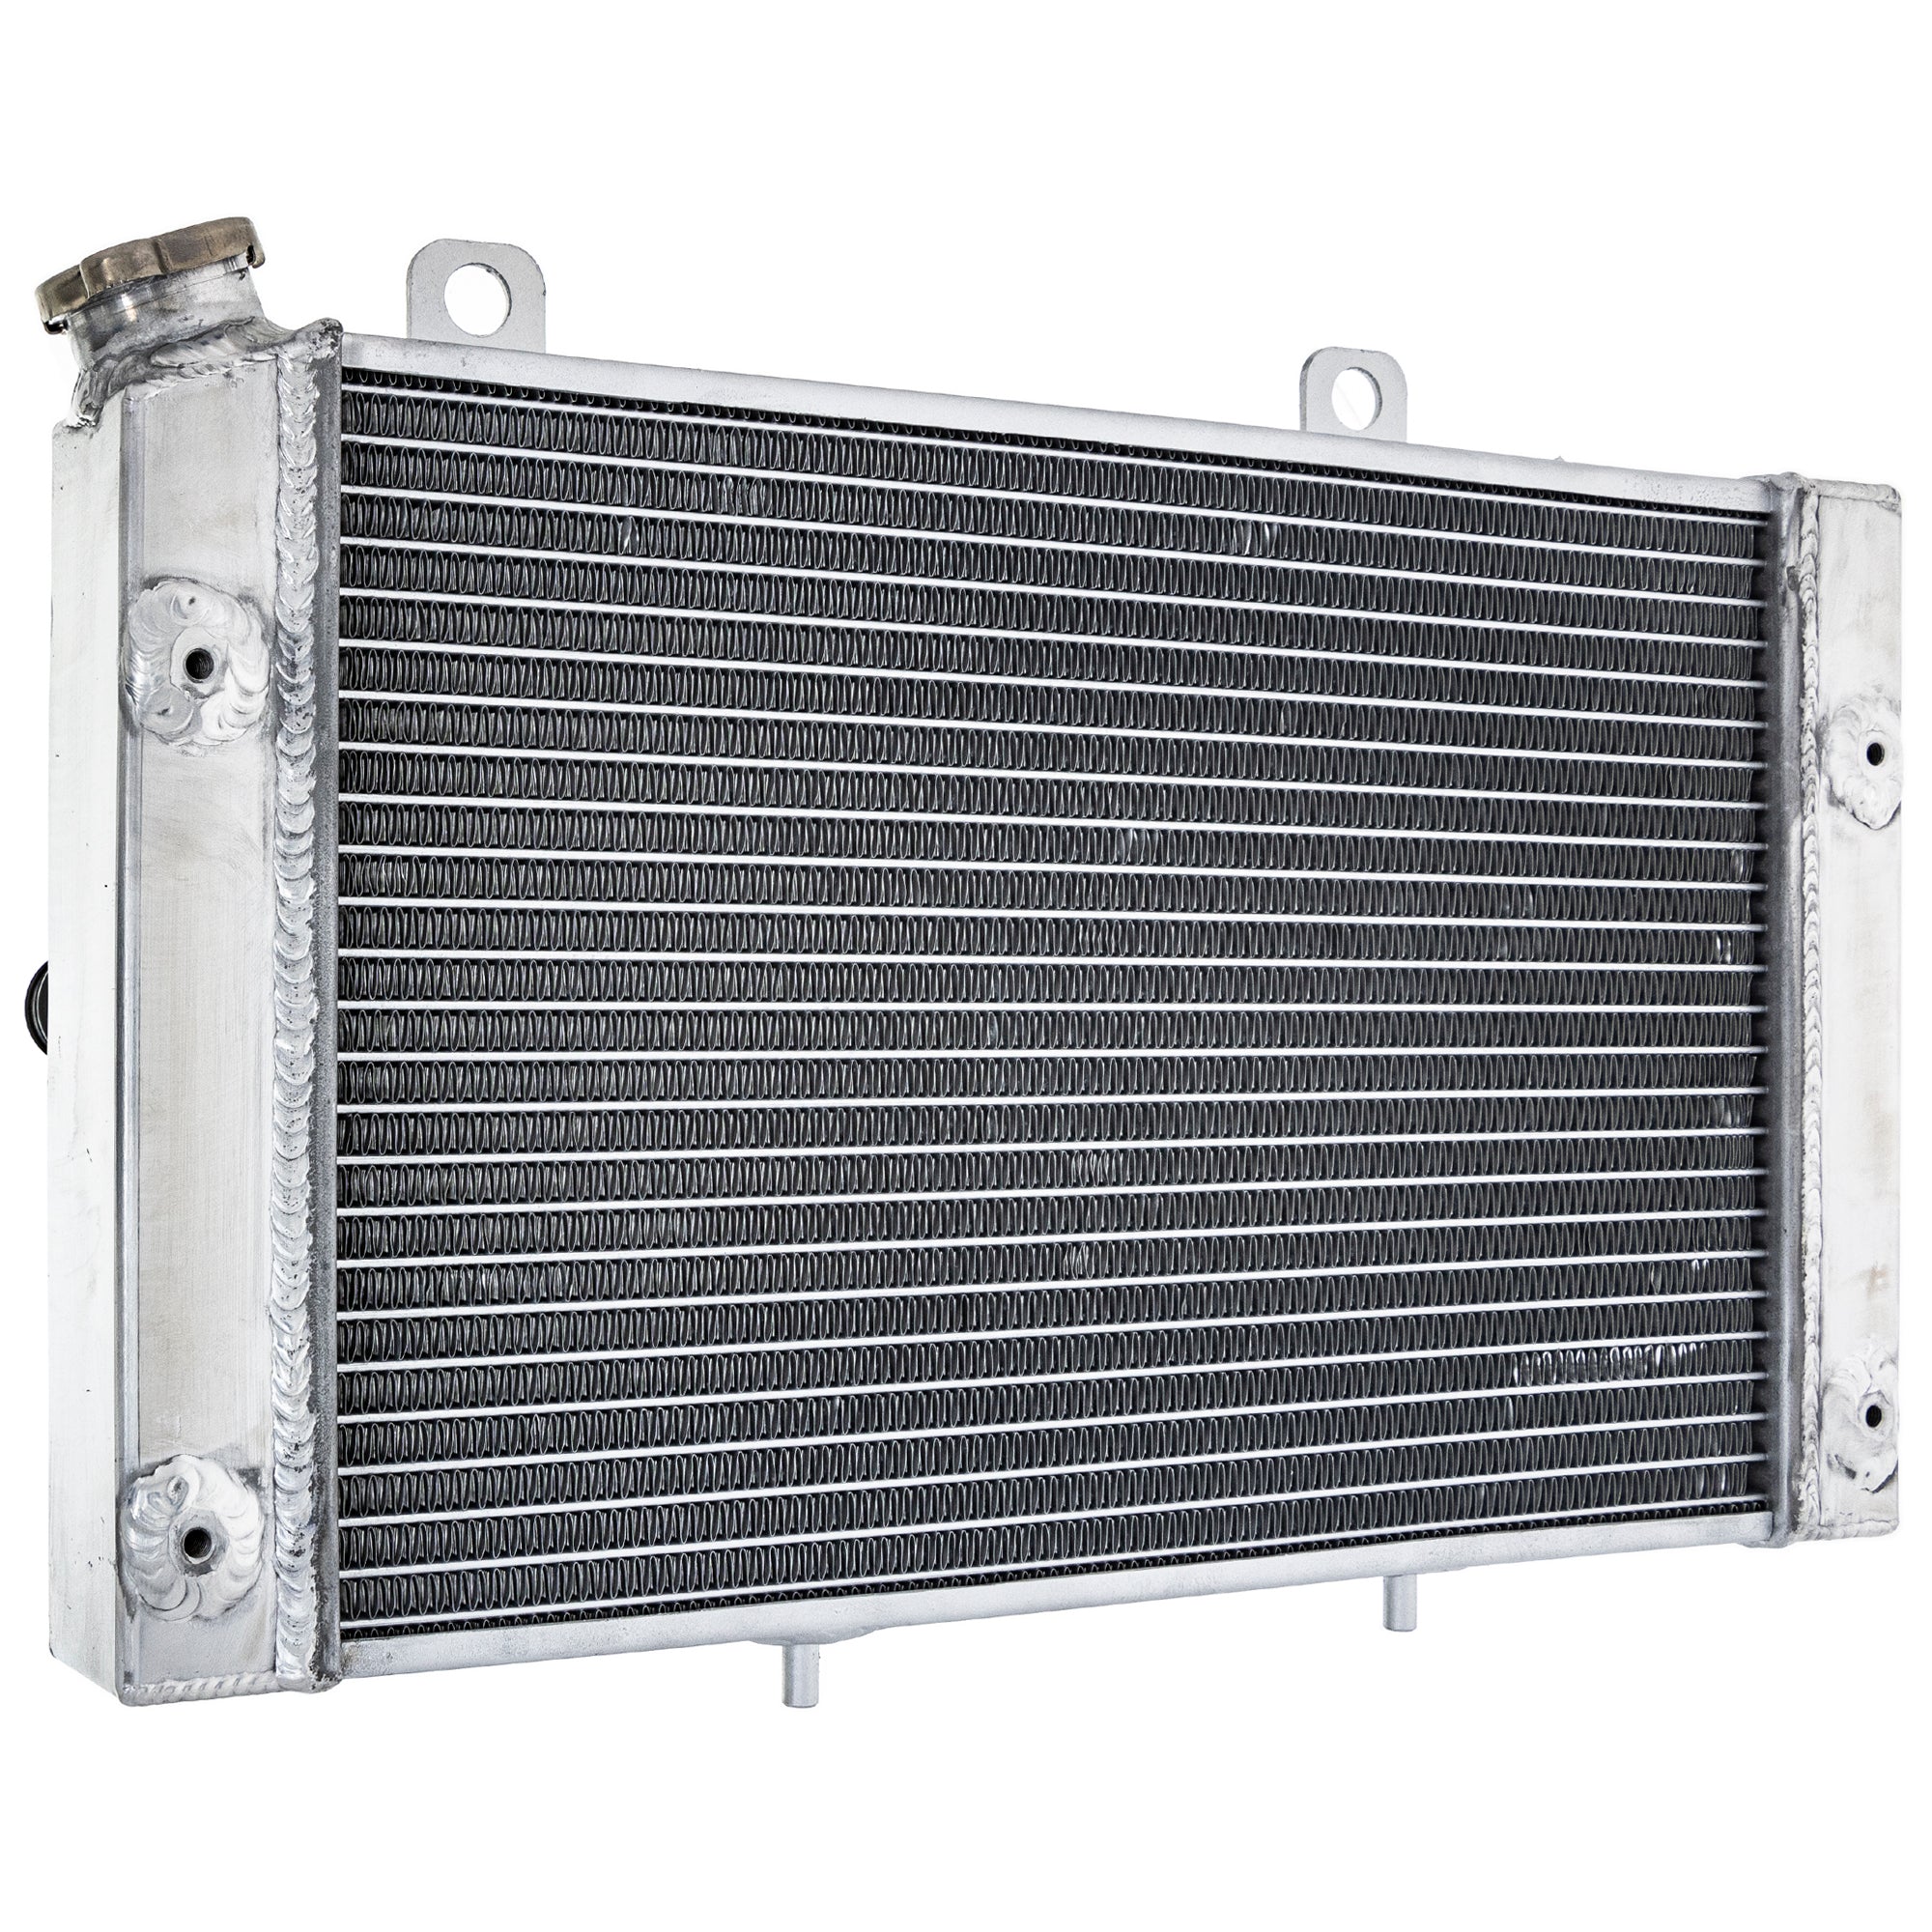 NICHE 519-CRD2262A High Capacity Radiator for zOTHER